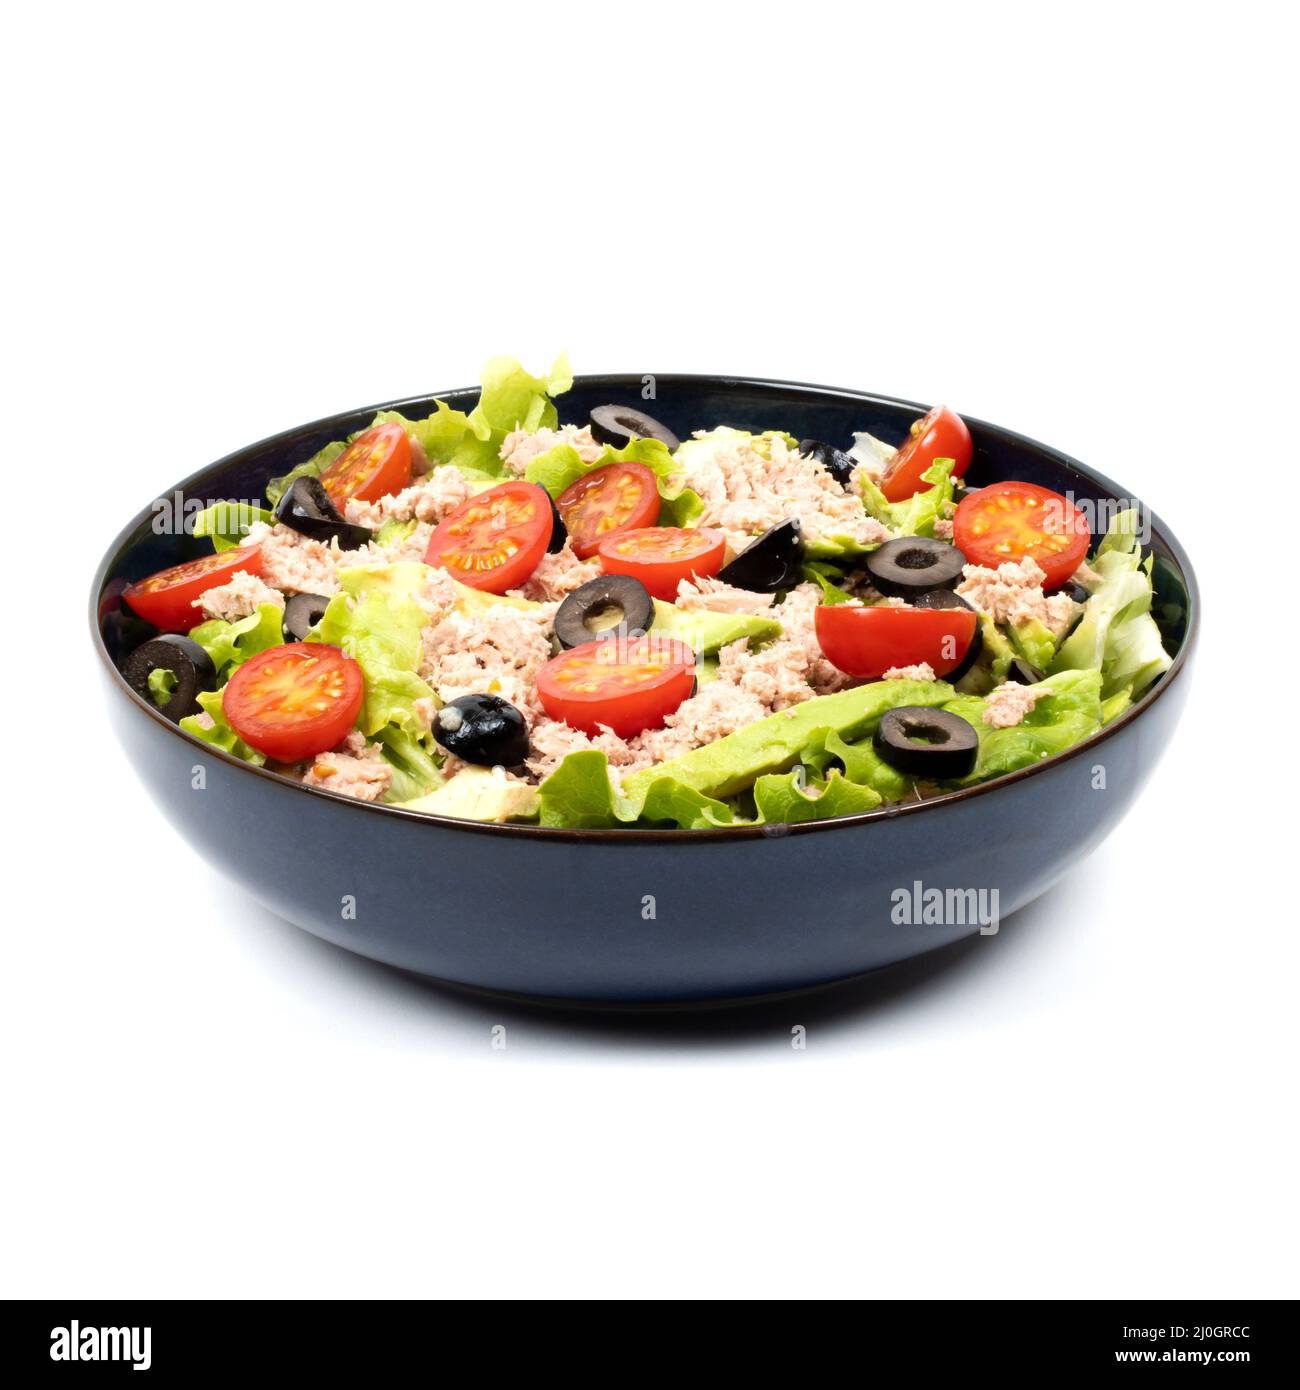 salad, avocado, tuna, tomatoes, olive in a bowl on a white background - studio shot Stock Photo